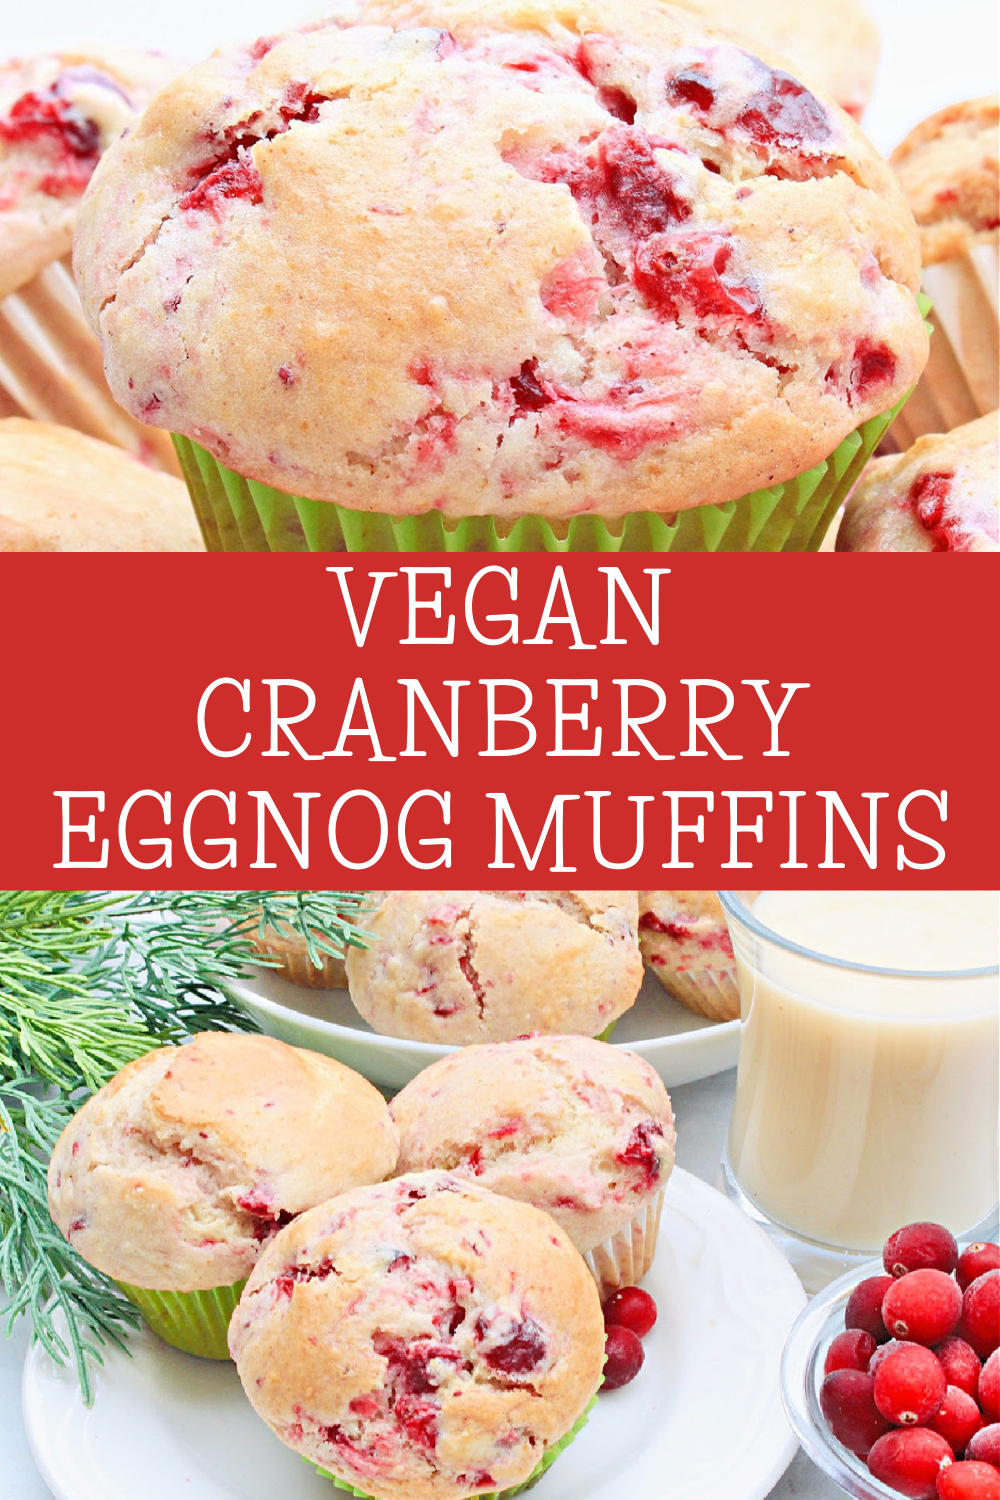 Cranberry Eggnog Muffins! Simple and sweet muffins with dairy-free eggnog and whole berry cranberry sauce. Perfect for the holiday season!  via @thiswifecooks